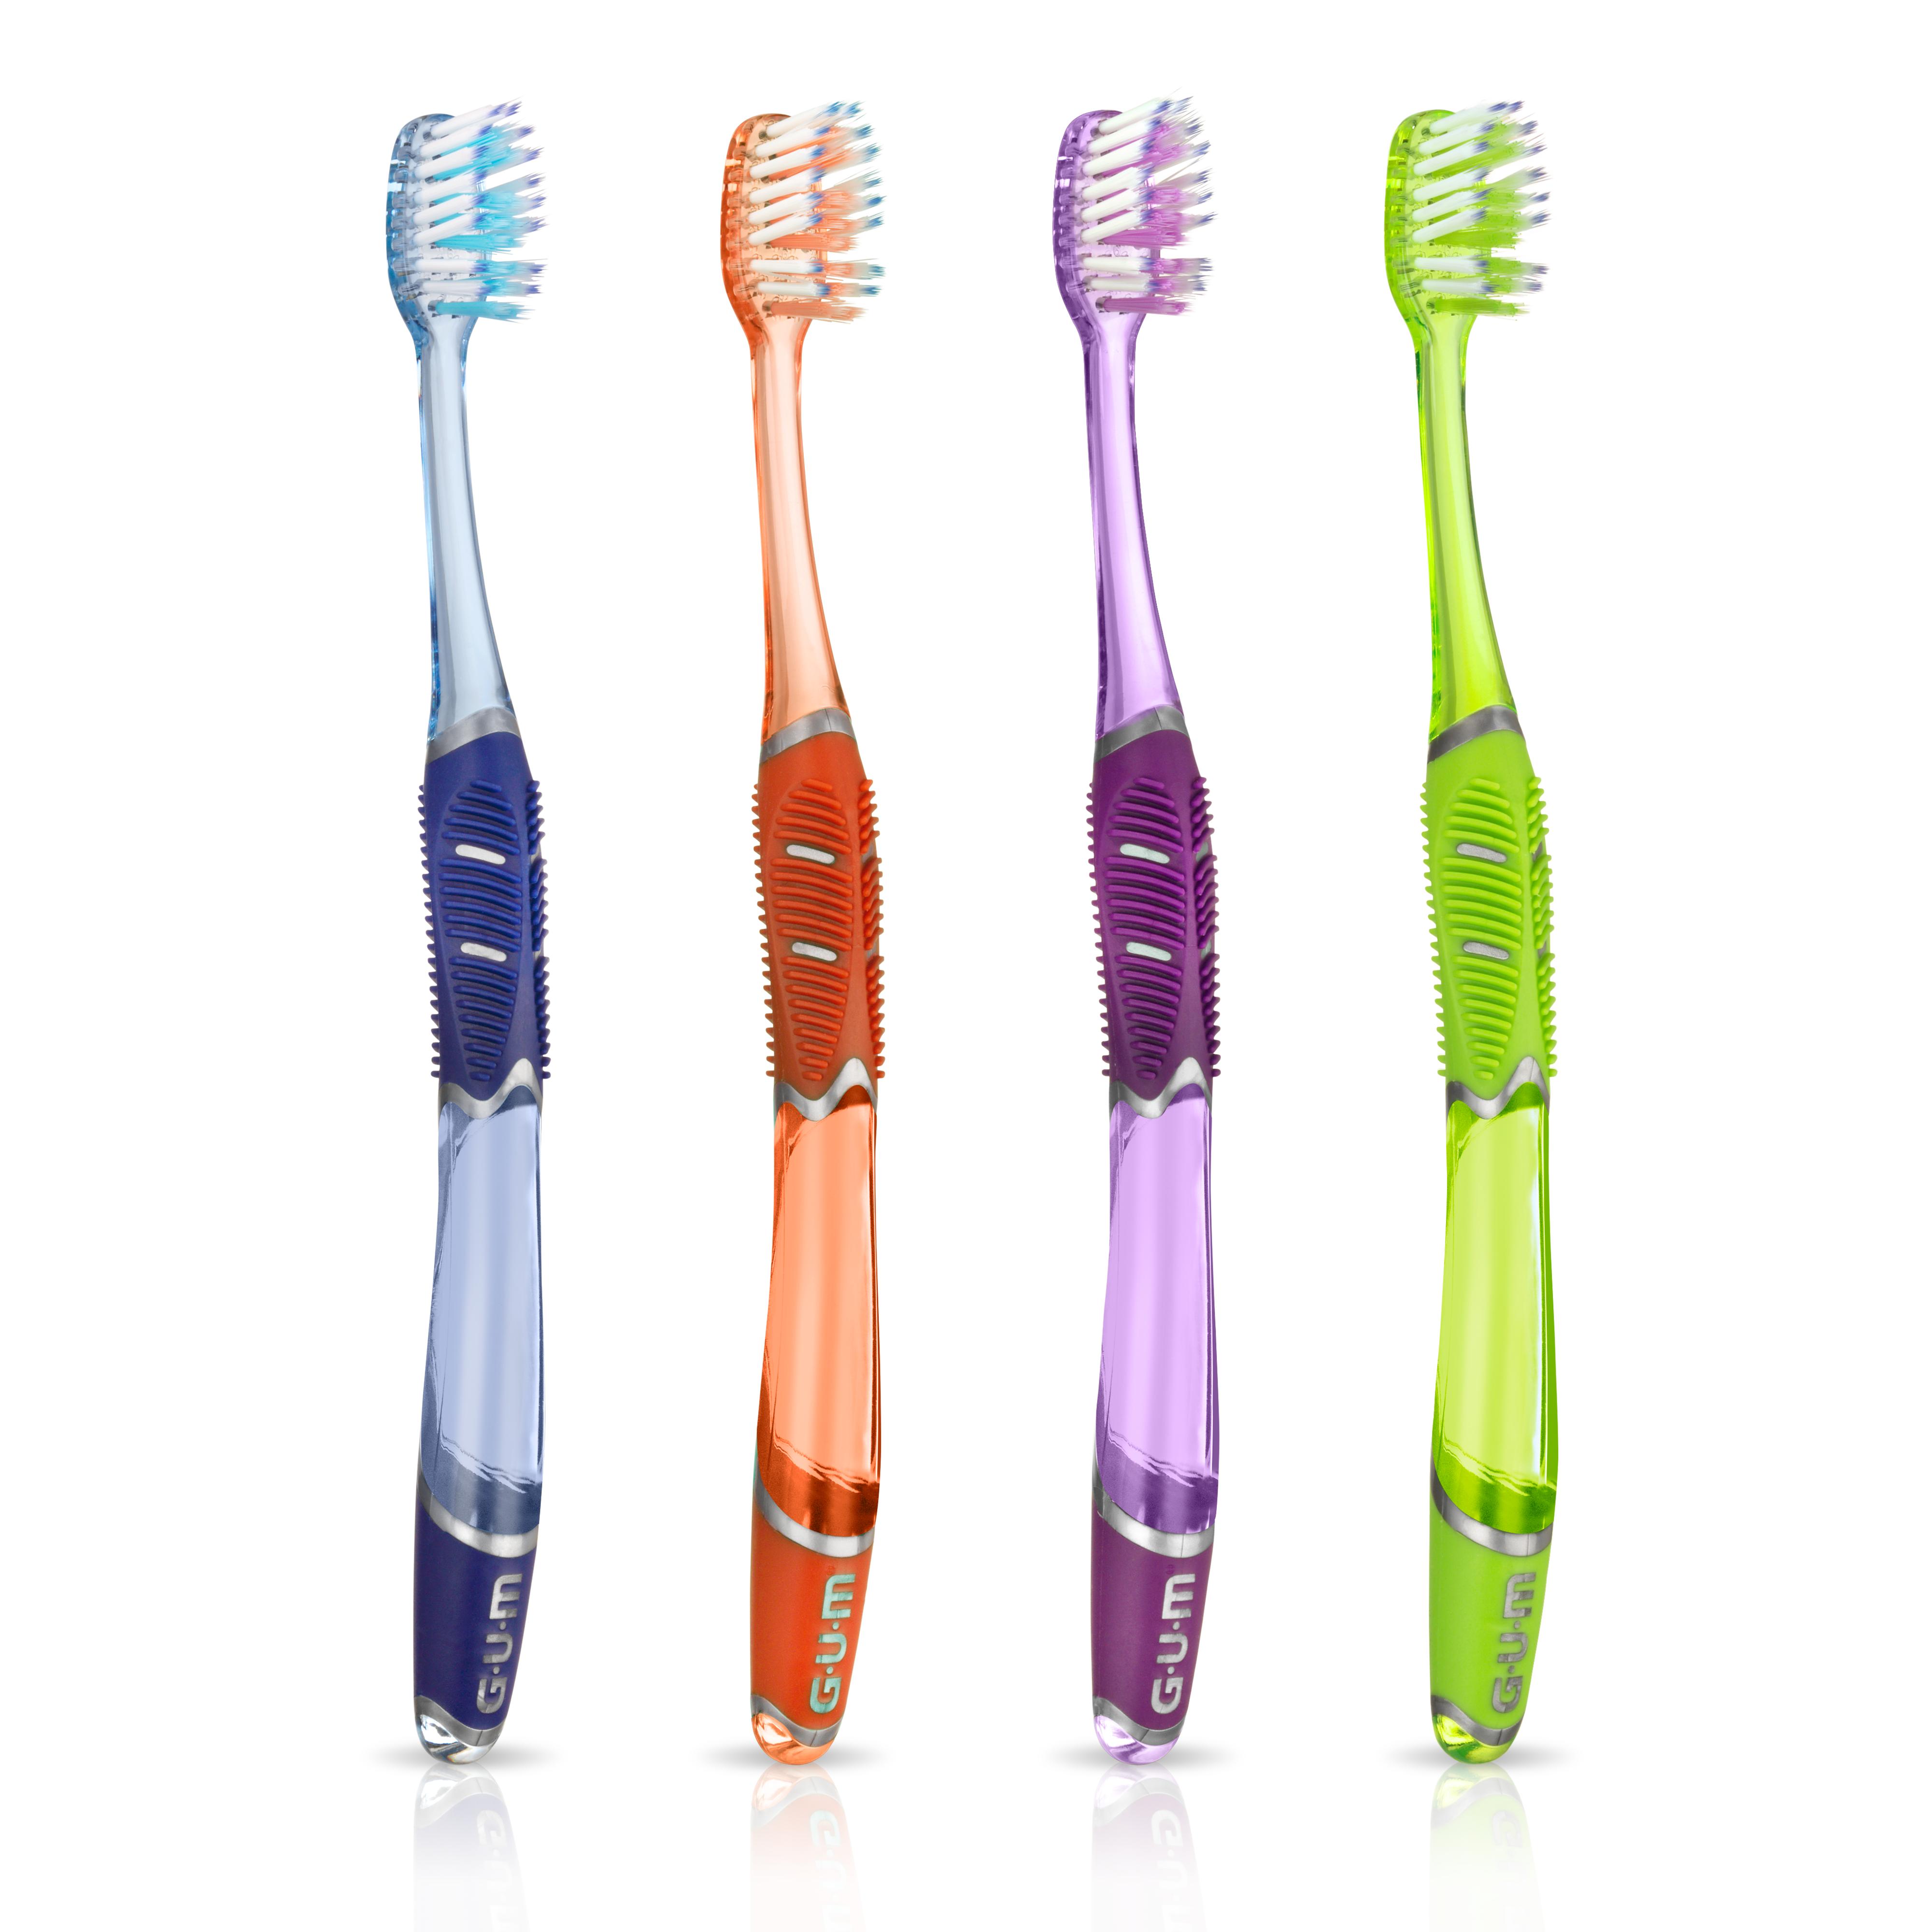 GUM PRO SENSITIVE toothbrushes in pink and green colours